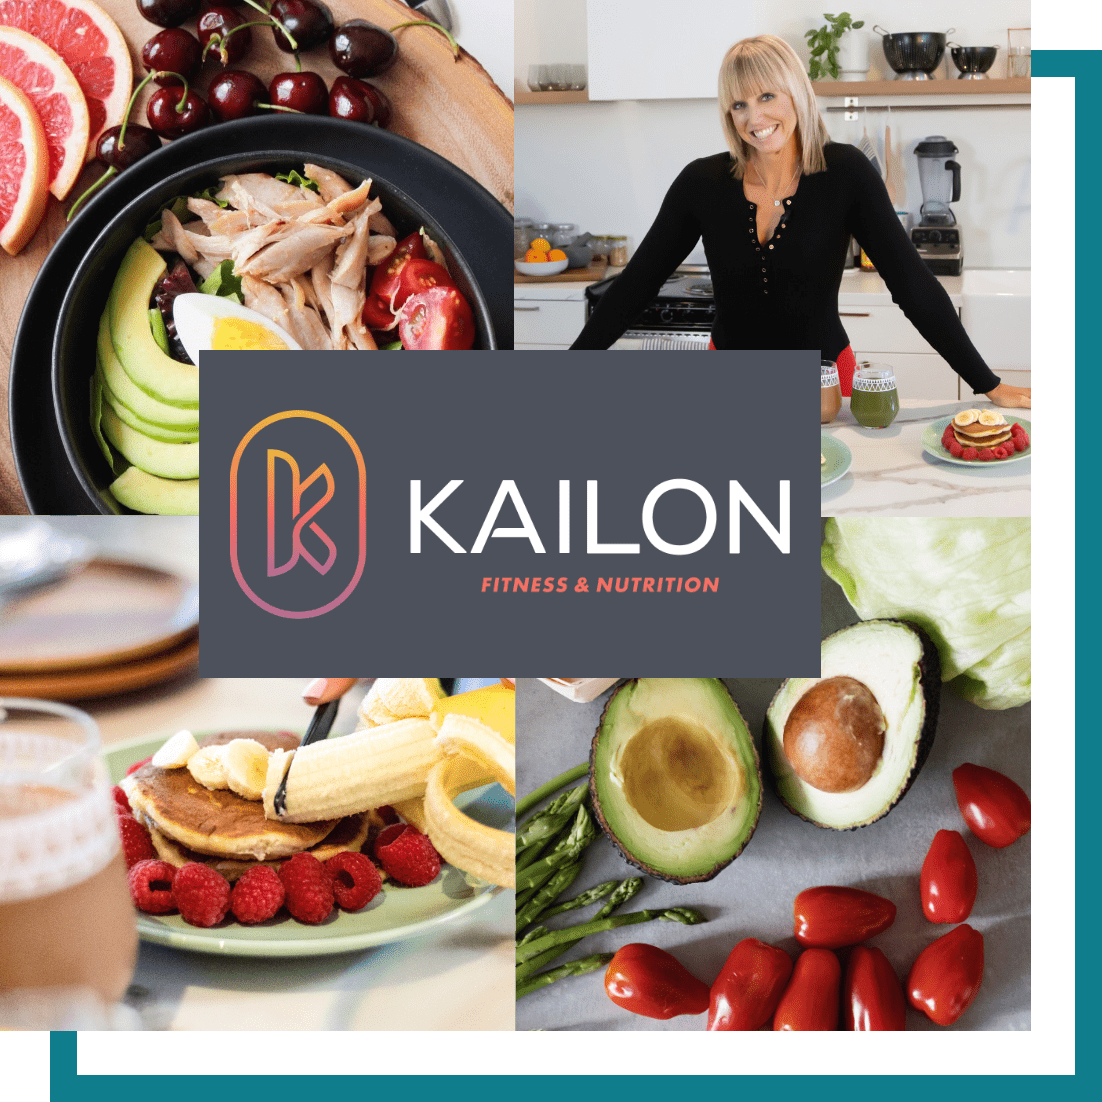 Kailon Method, Sign up to receive a FREE Nutrition Guide